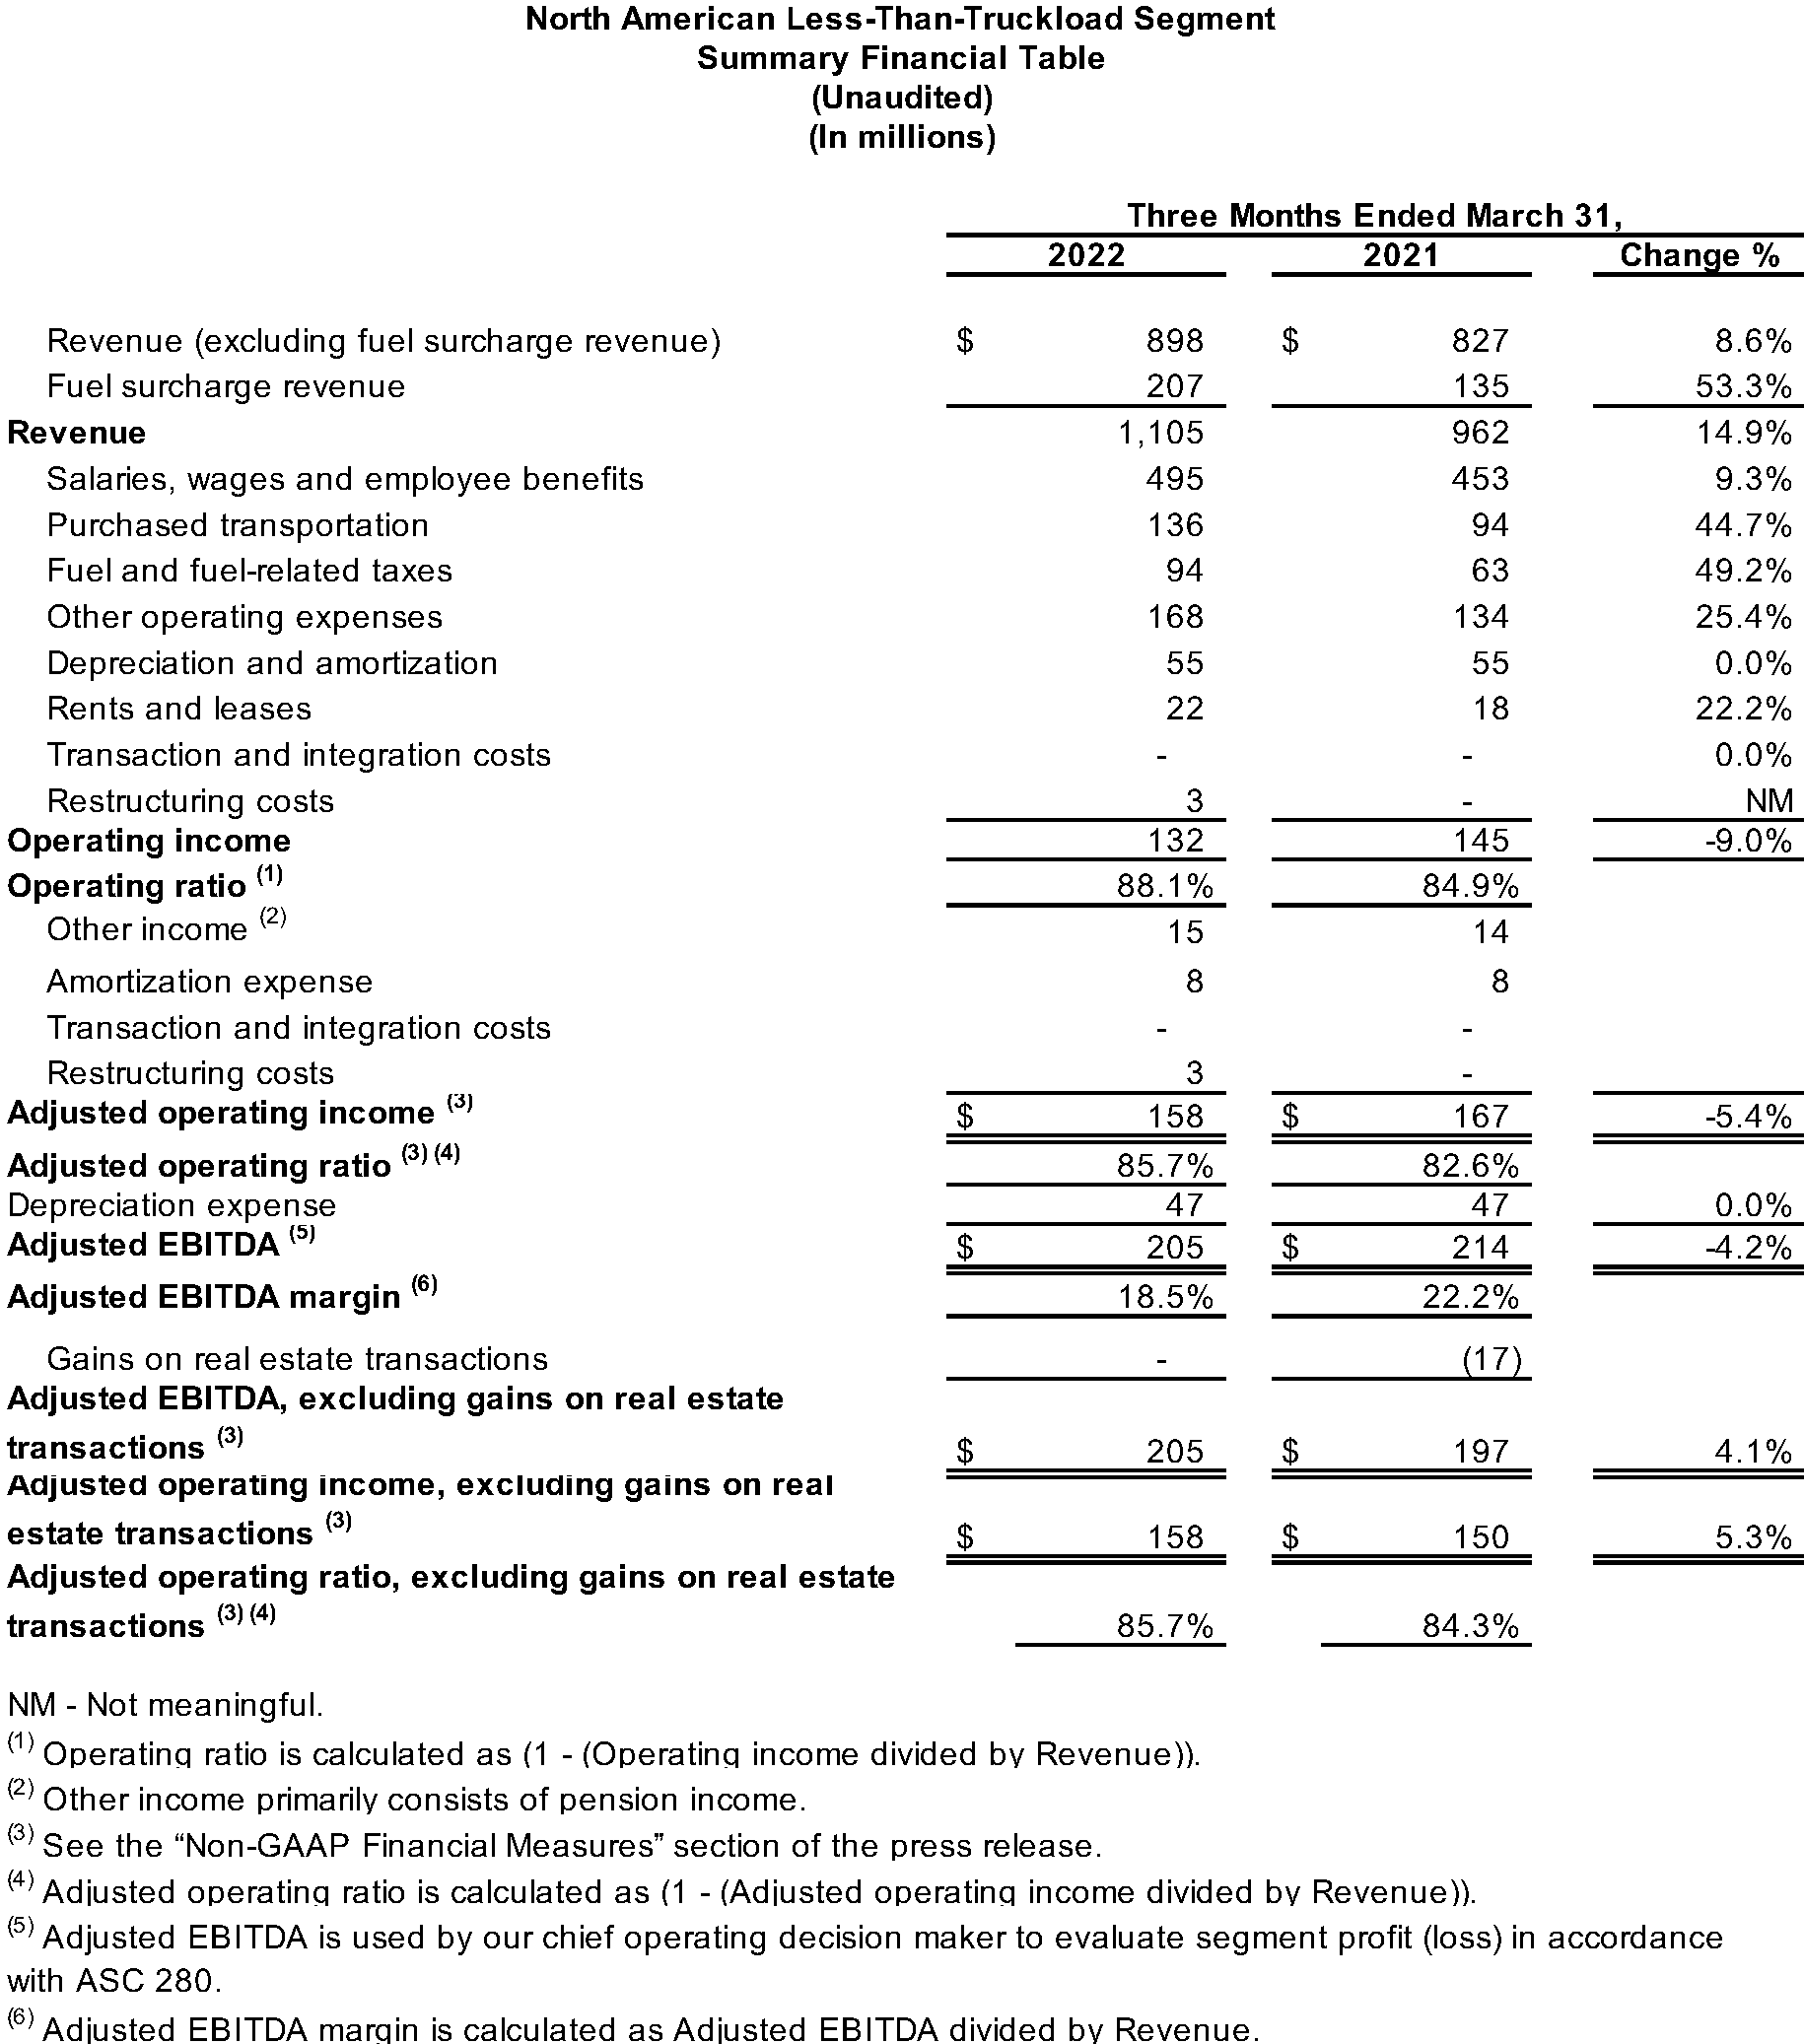 North American Less-Than-Truckload Segment Summary Financial Table